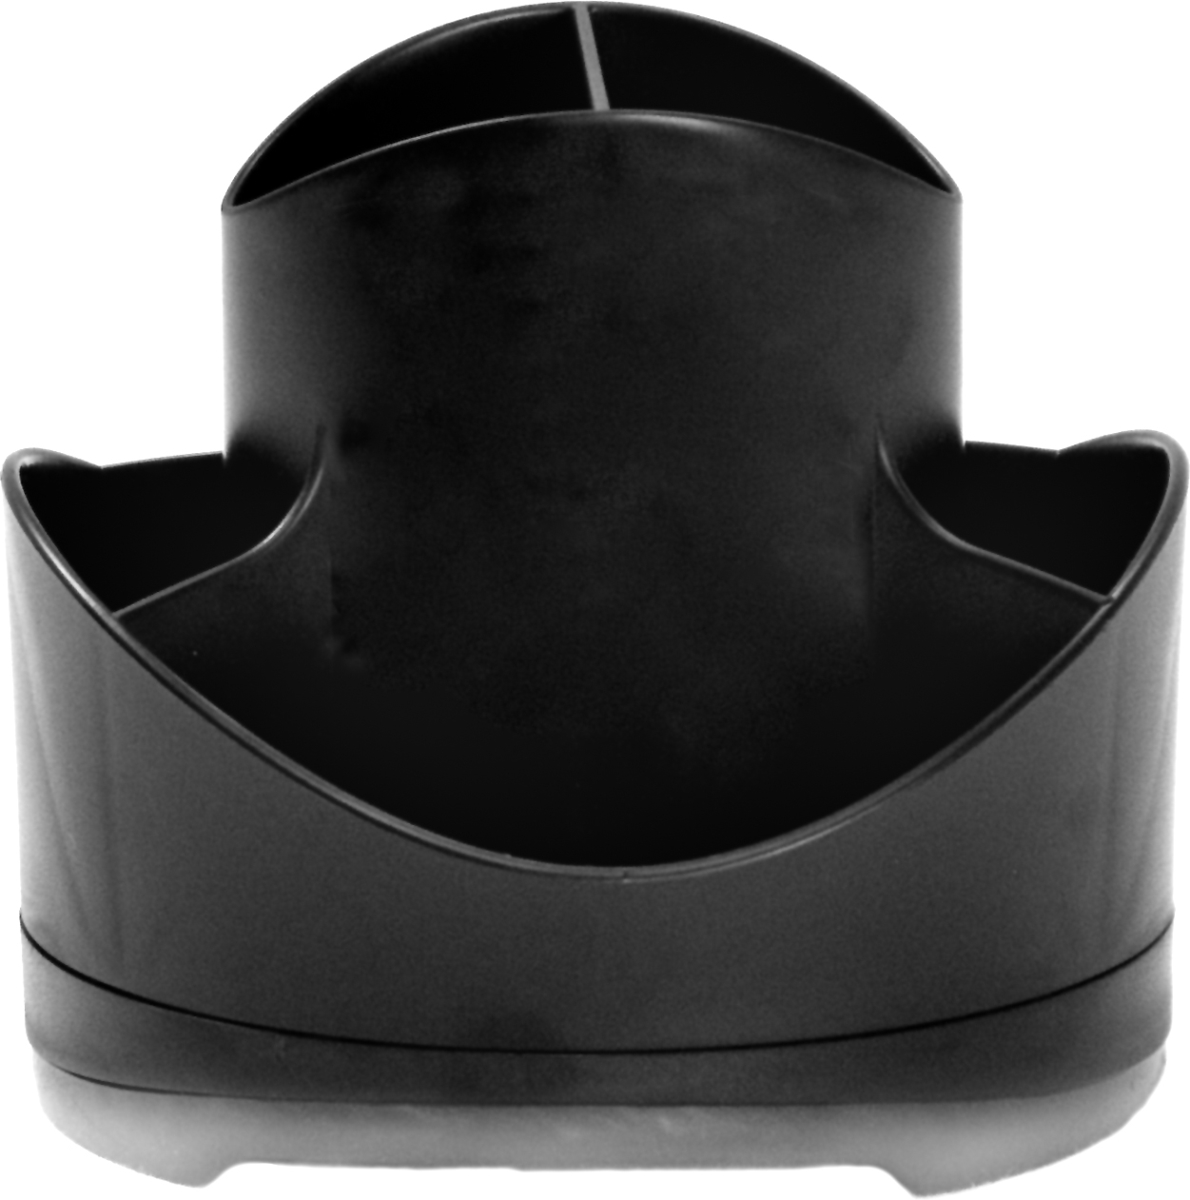 70115b06c Iceland-series Rubber Grip Rotary Sorter, Black - Pack Of 6